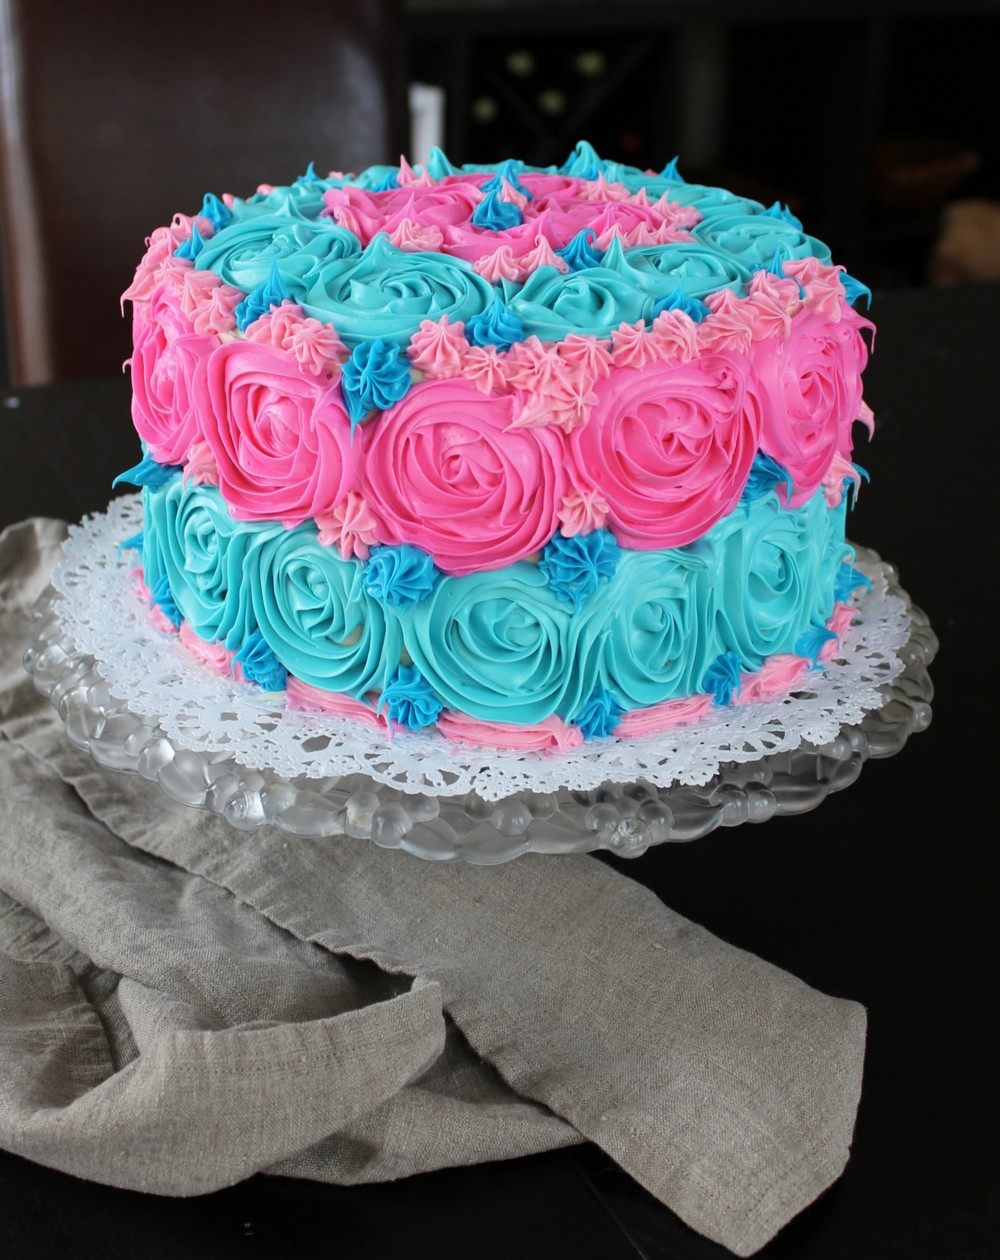 Cake Ideas For Gender Reveal Party
 DIY